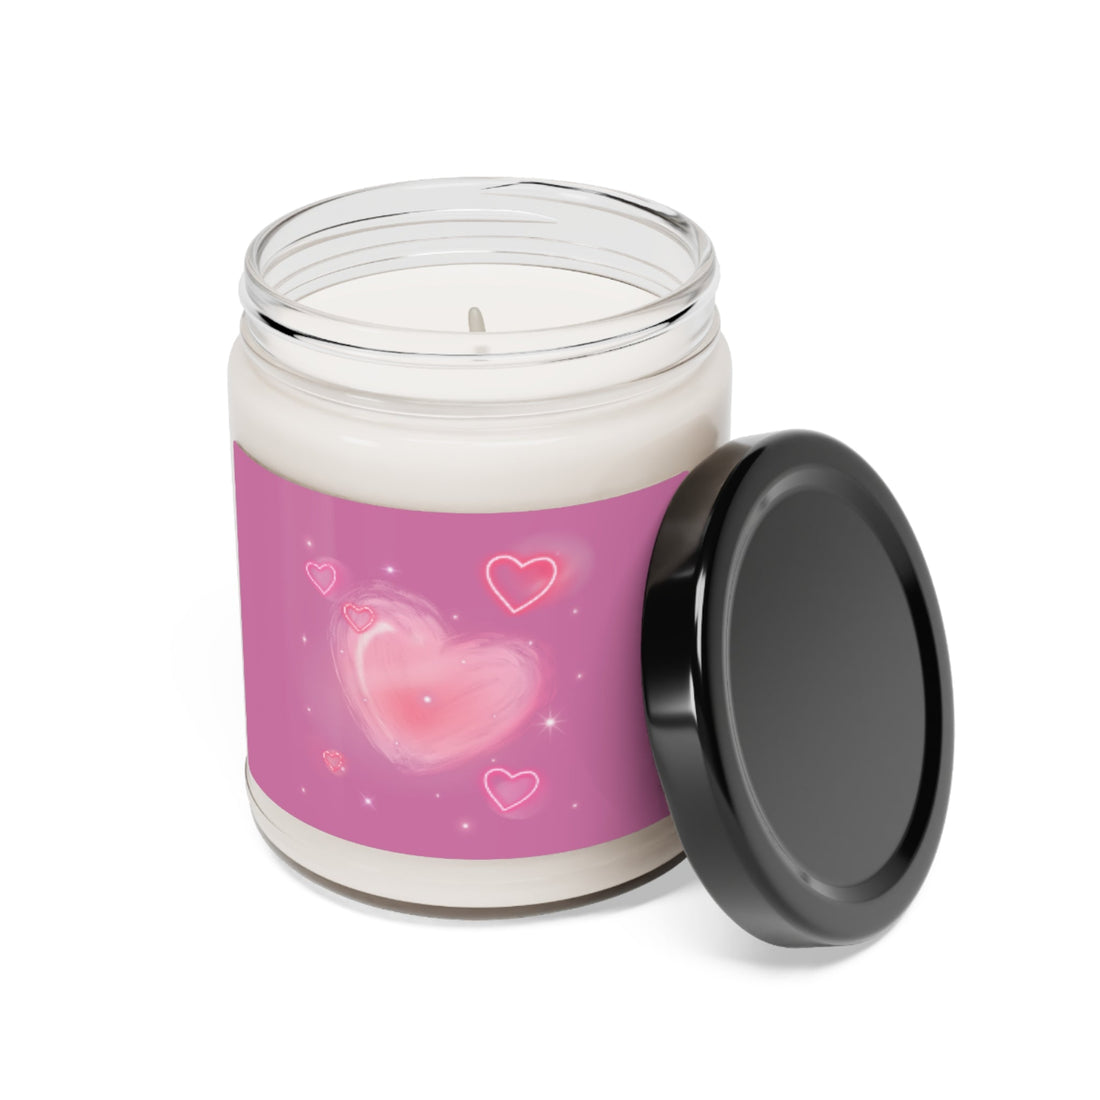 All Hearts for You Scented Soy Candle, 9oz - Home Decor - Positively Sassy - All Hearts for You Scented Soy Candle, 9oz